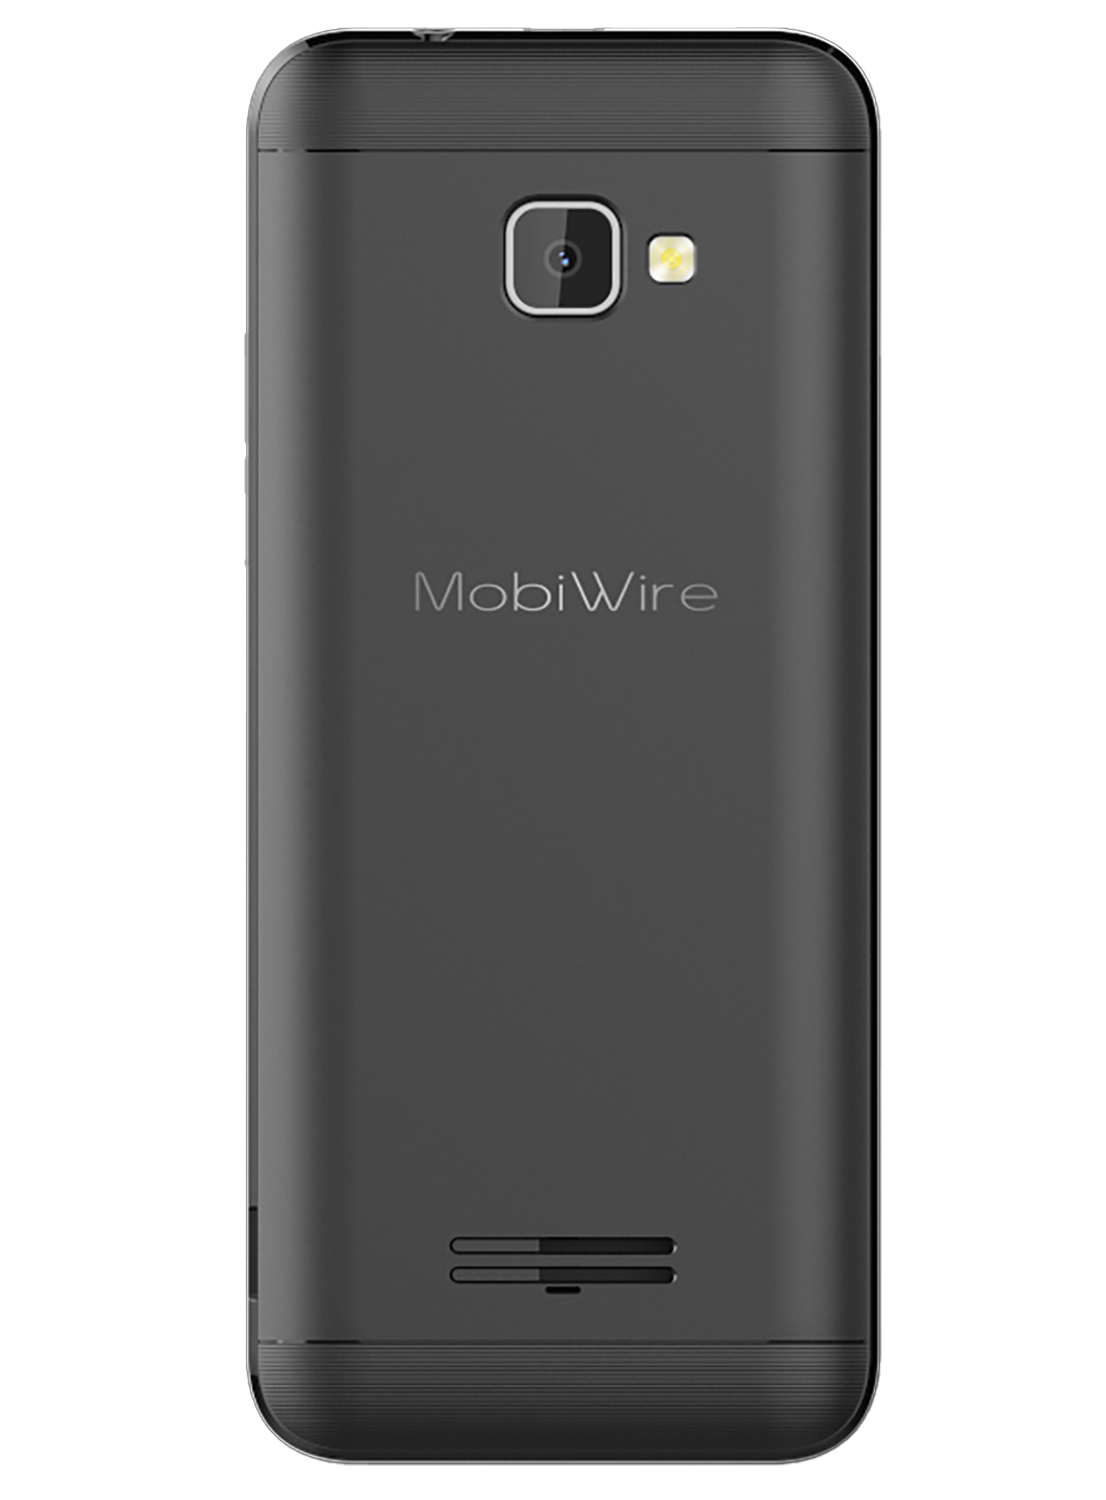 Mobiwire Oneida LTE (with Camera)